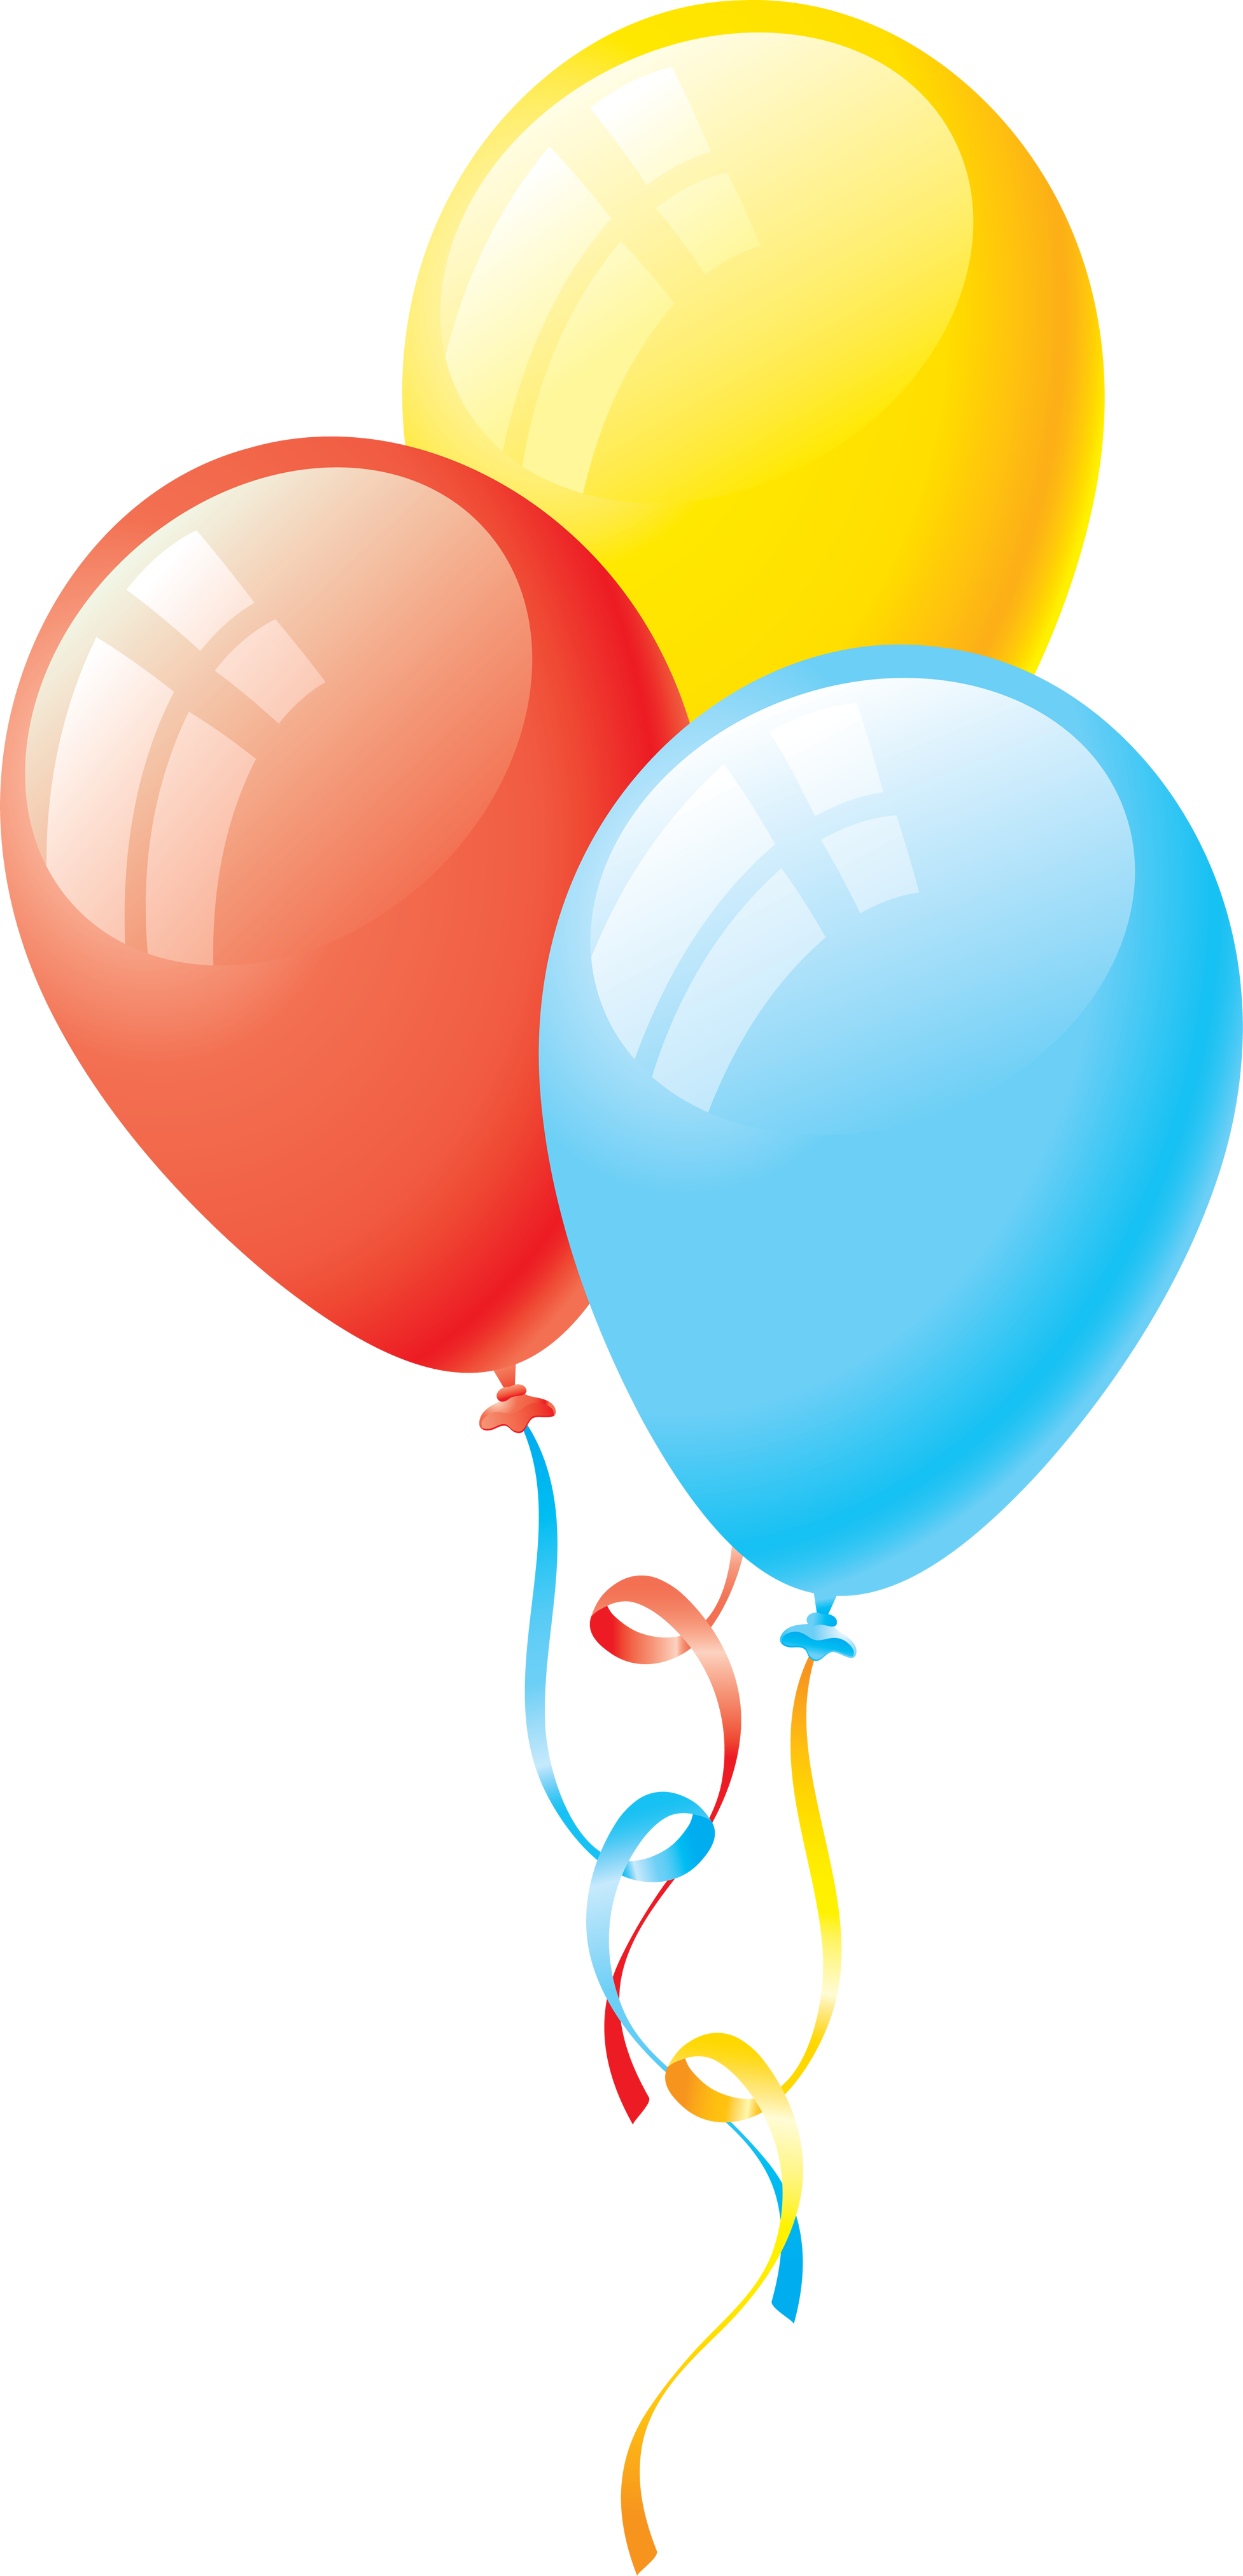 Party Balloon Birthday Glossy Free Photo PNG Image